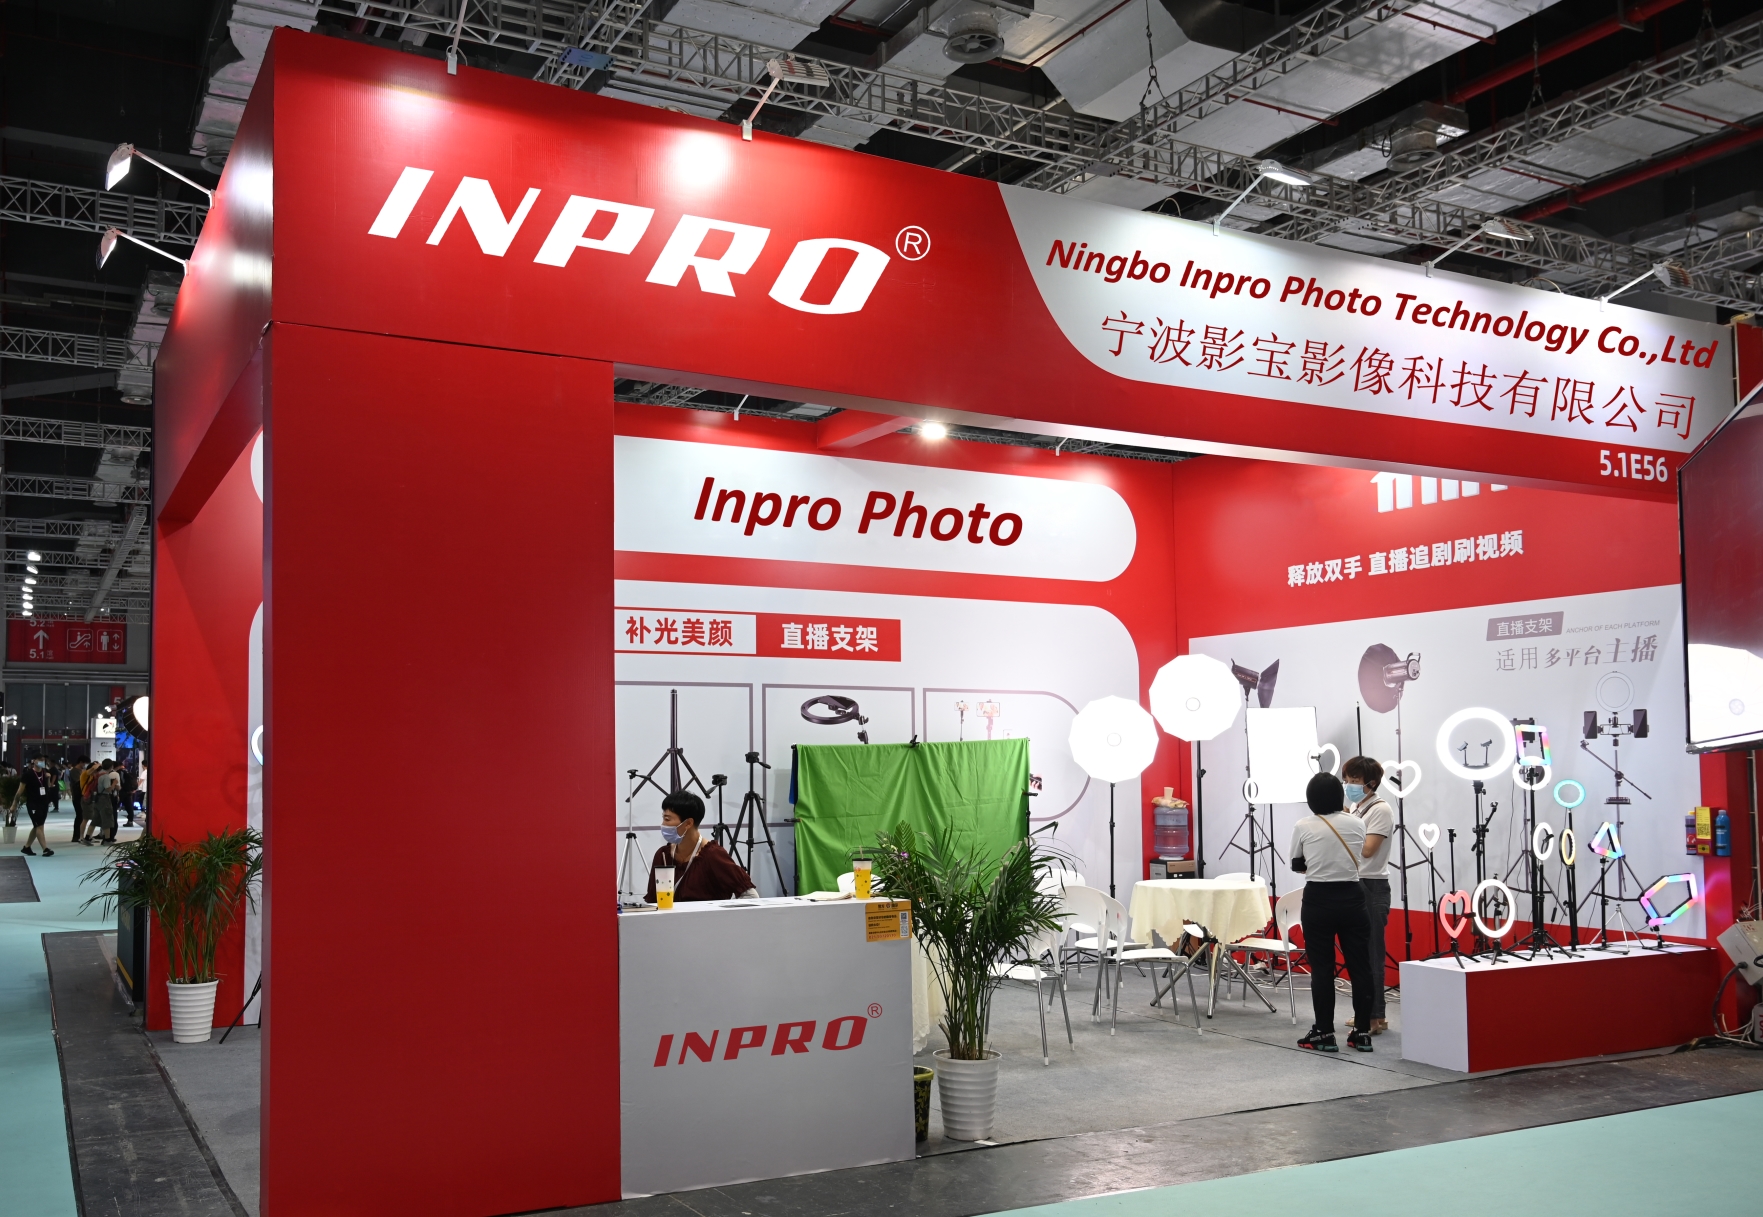 Our booth in 2021 Shanghai International Photo & Imaging Expo